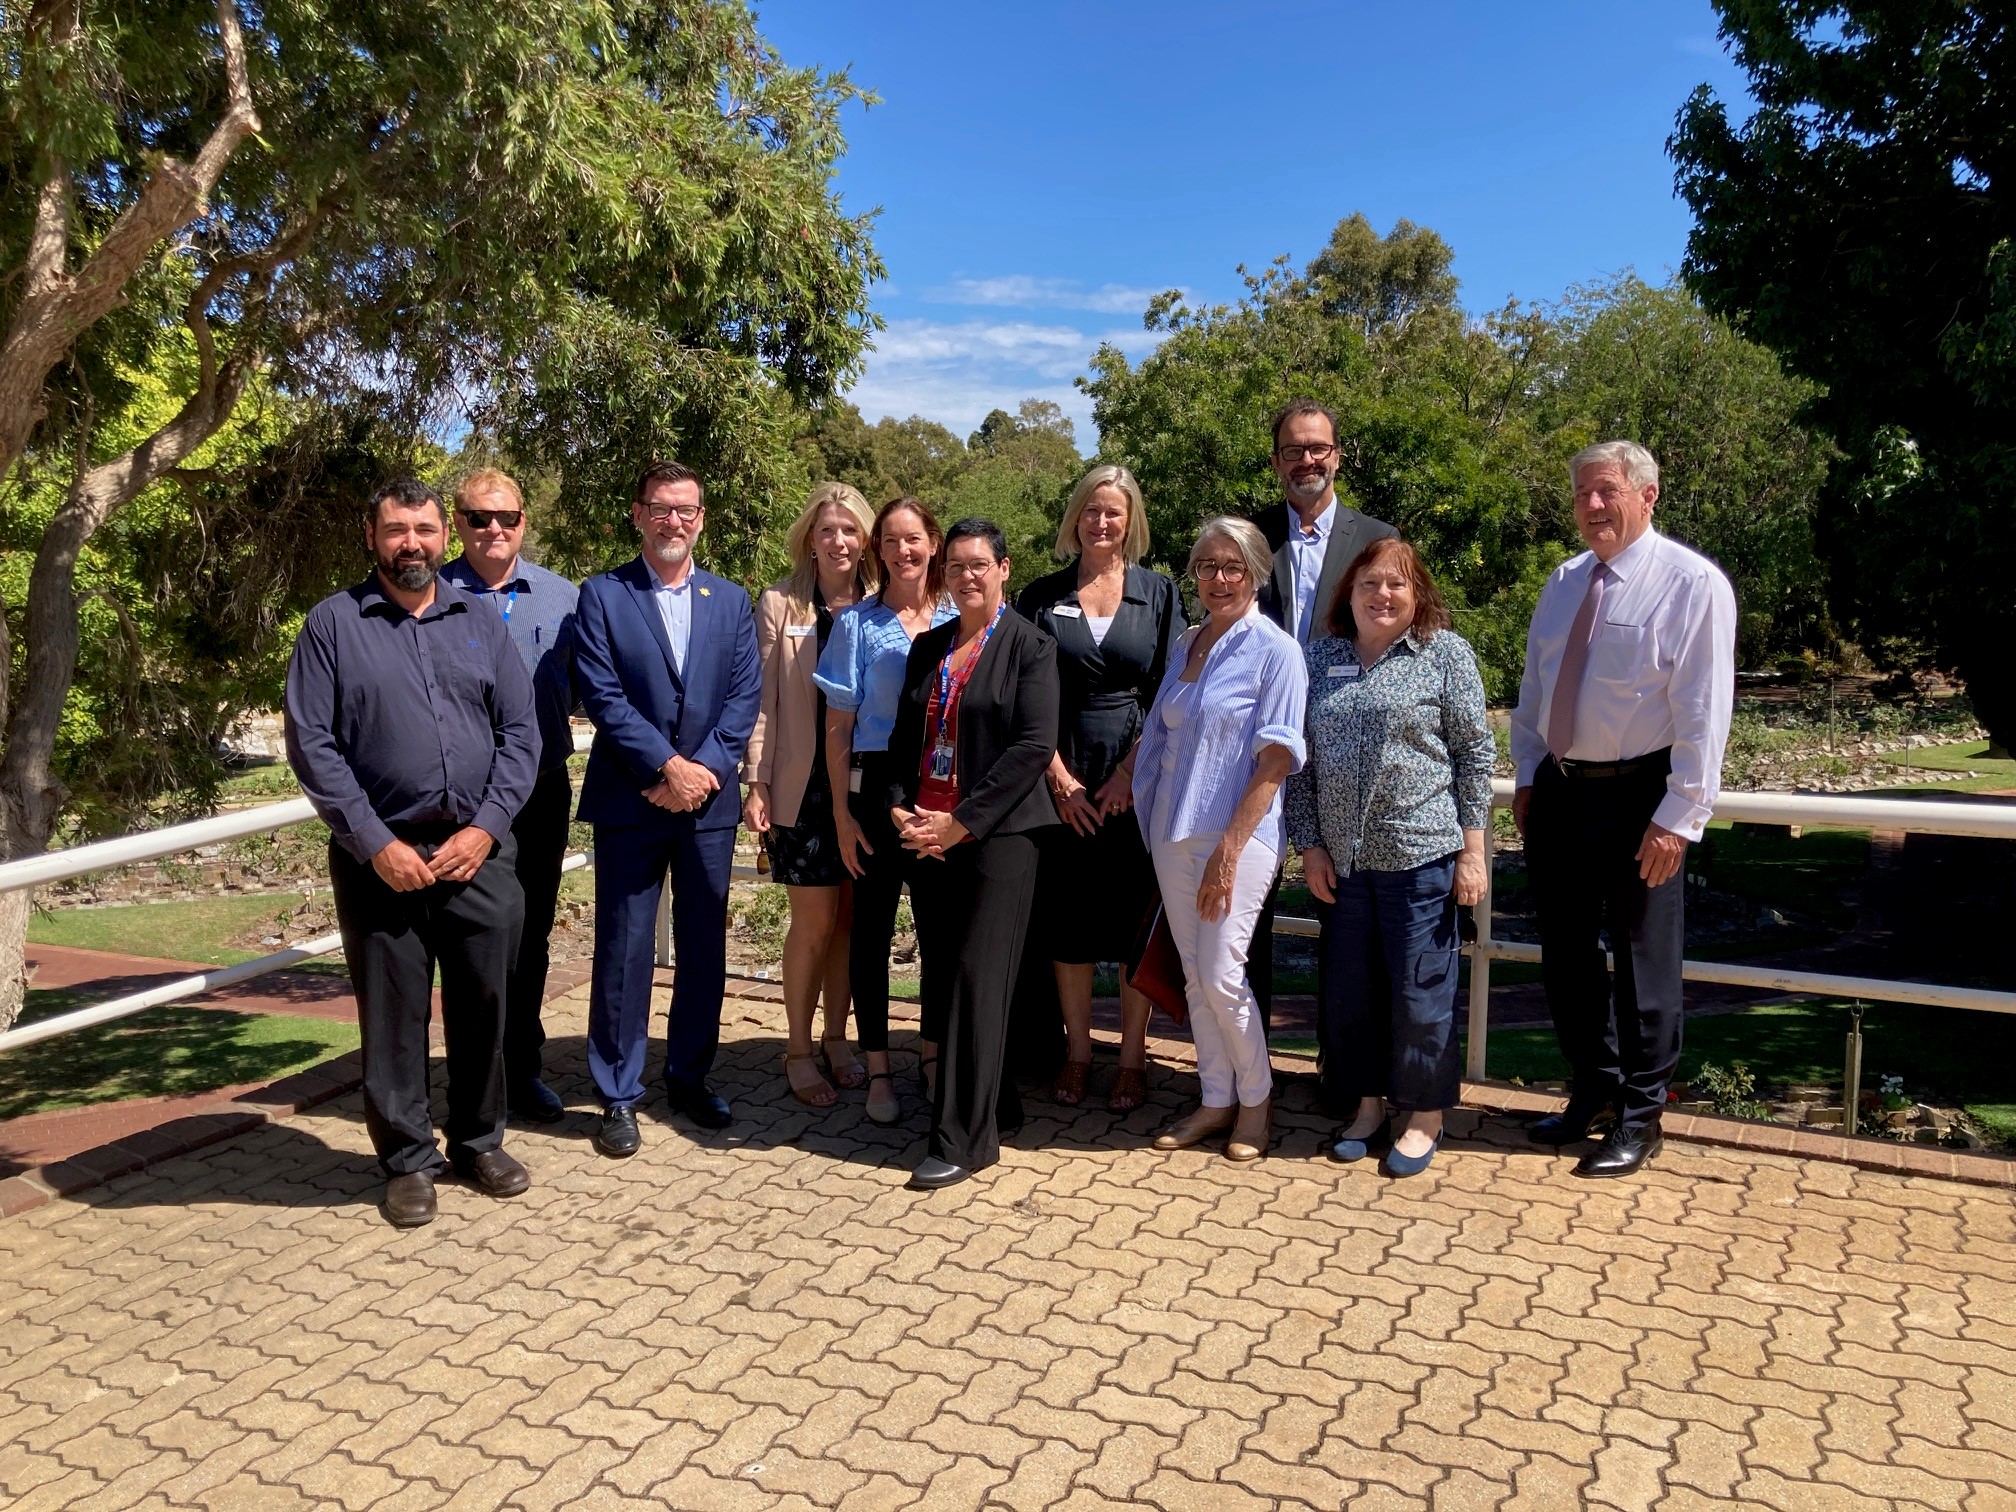 a visit from Cancer Council WA representatives to honour the contribution of Metropolitan Cemeteries Board for their donation from the Orthometals program.